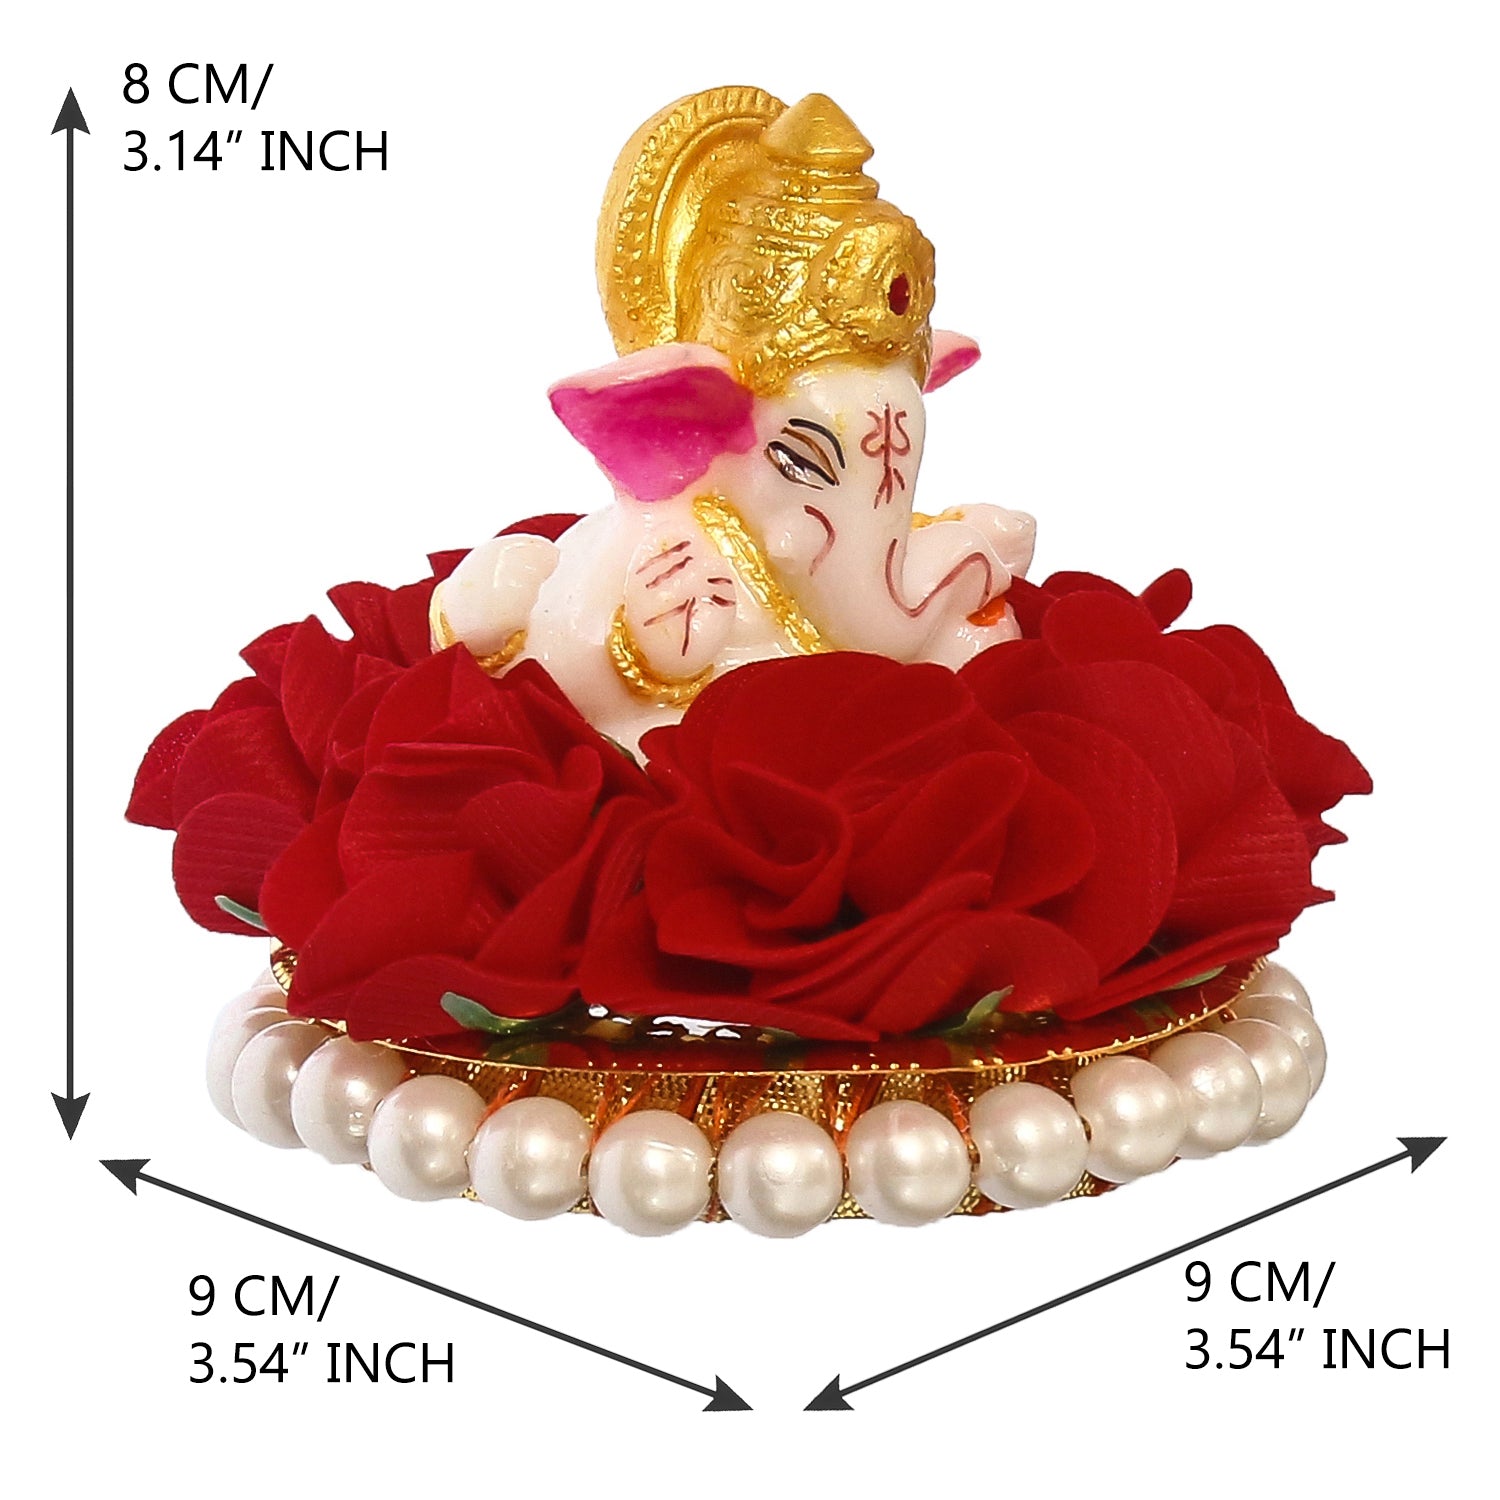 Lord Ganesha Idol on Decorative Handcrafted Plate with Red Flowers 3